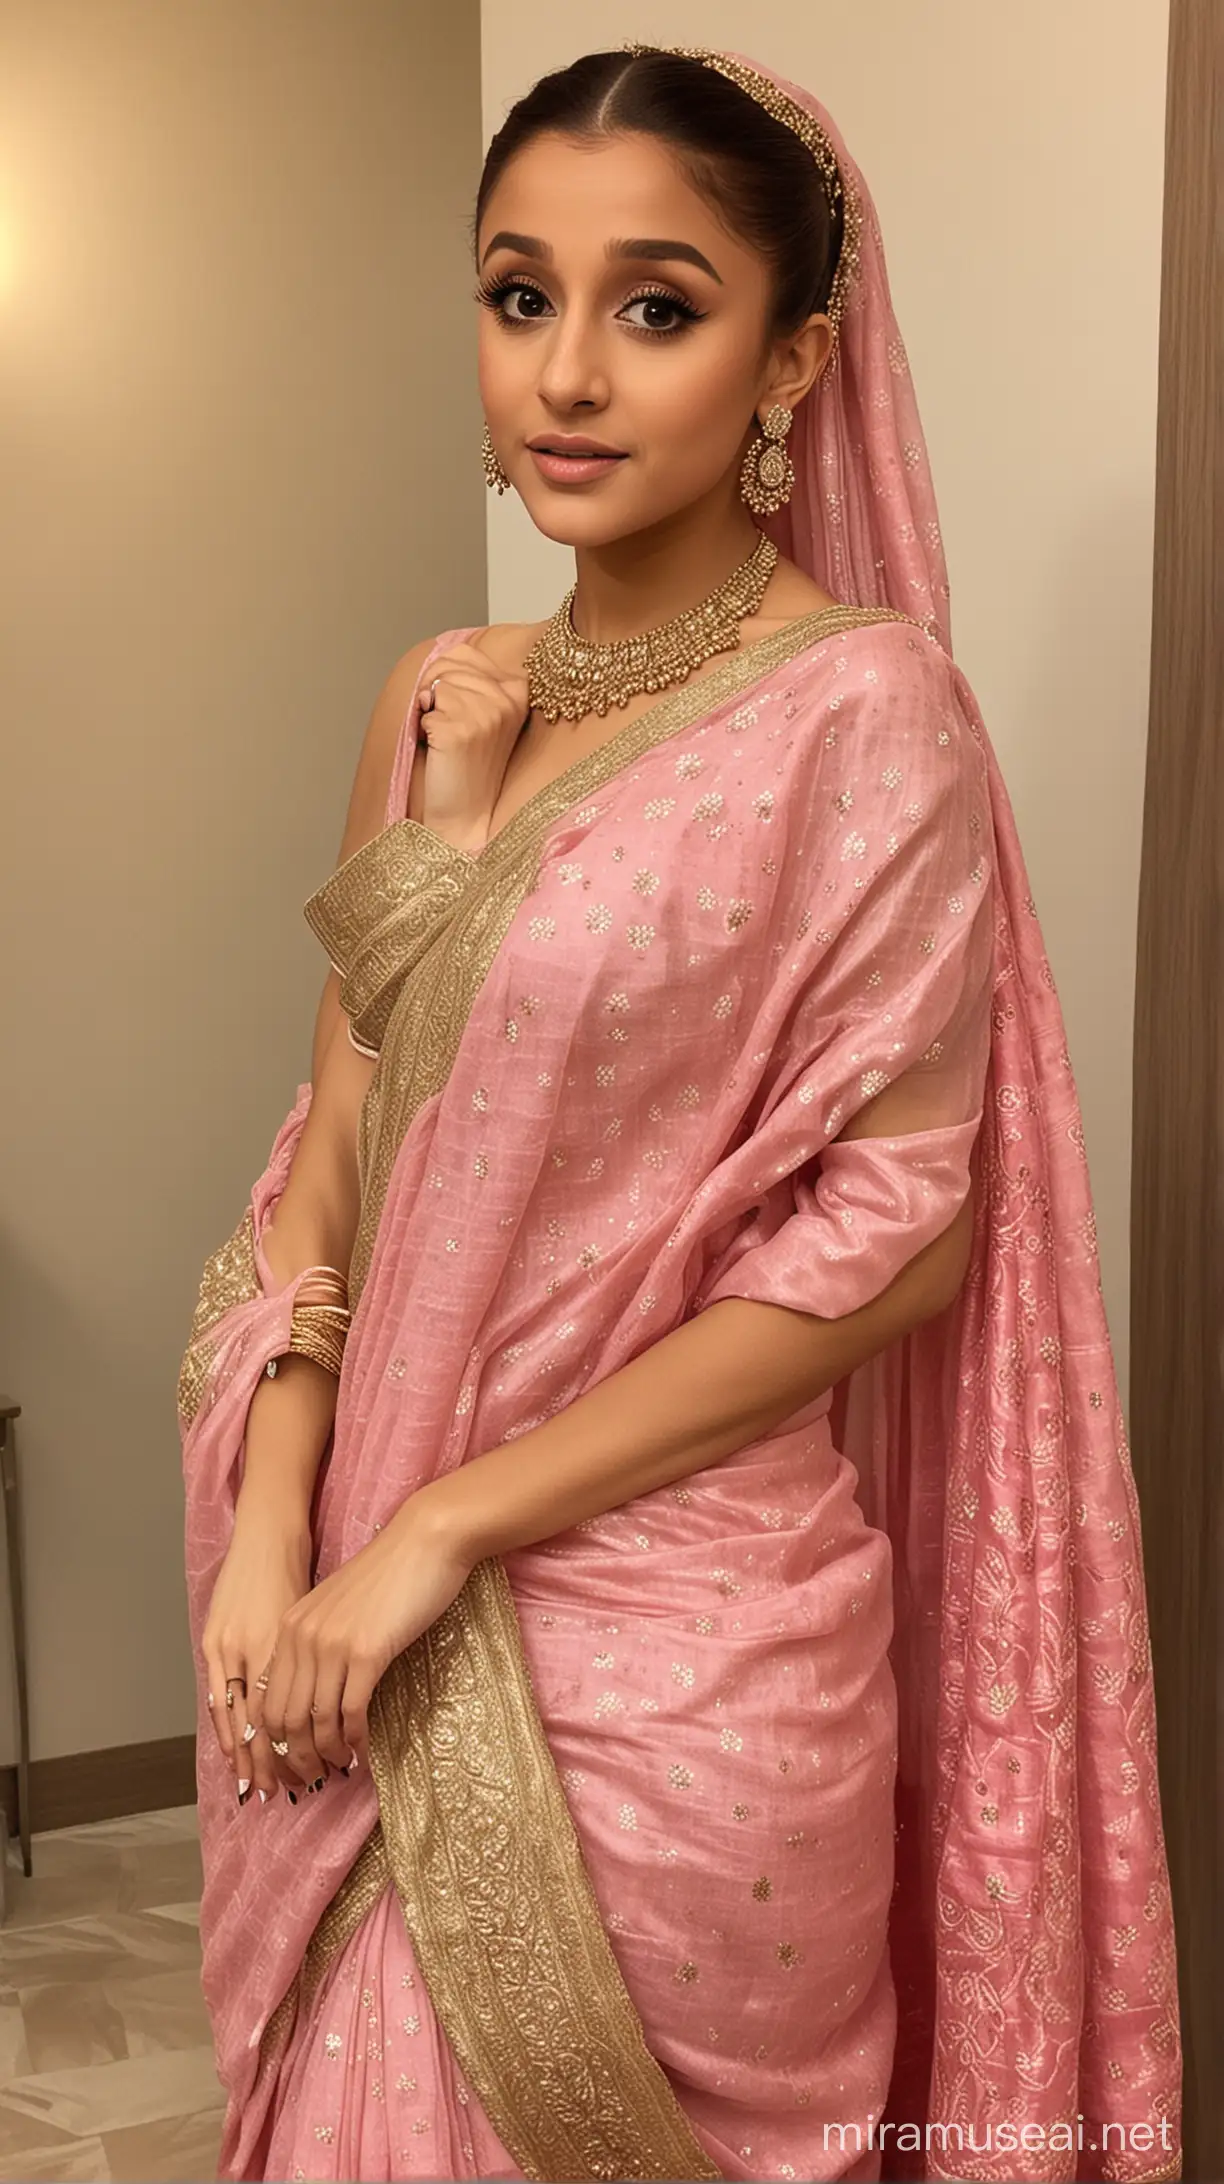 Ariana Grande dressed in traditional Indian saree 